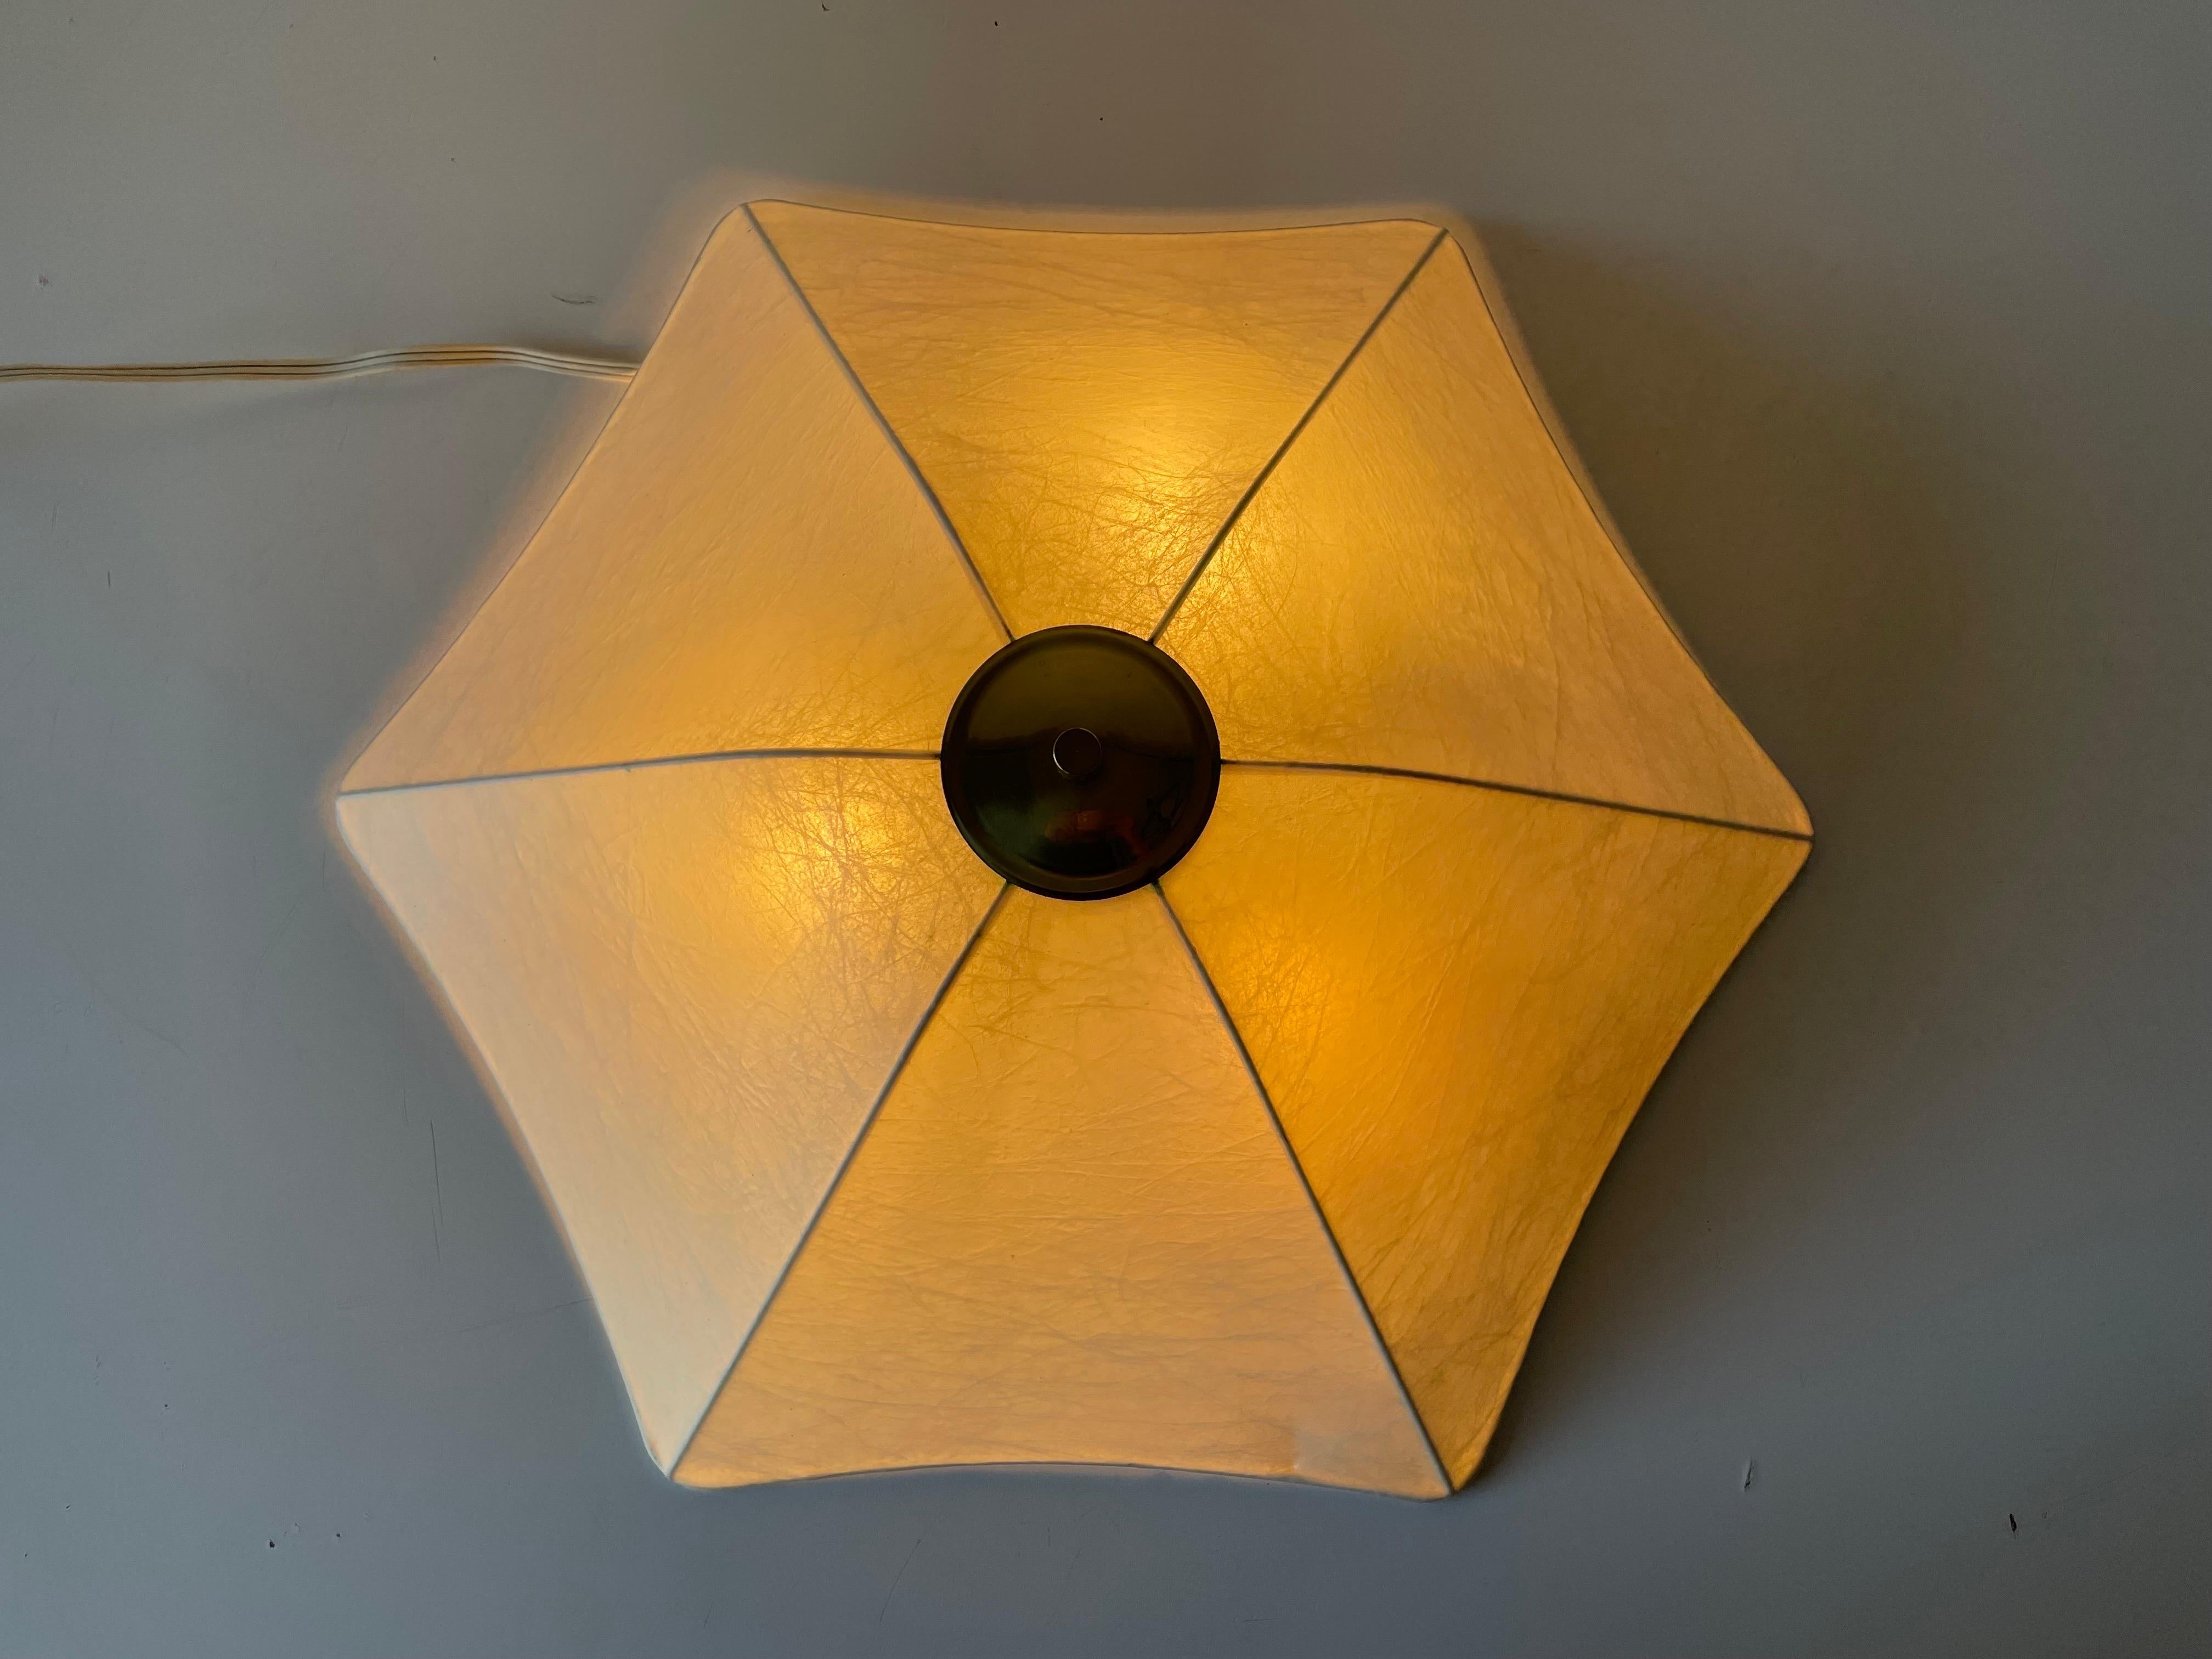 Cocoon Large Flush Mount Ceiling Lamp by Goldkant, 1960s Germany 3